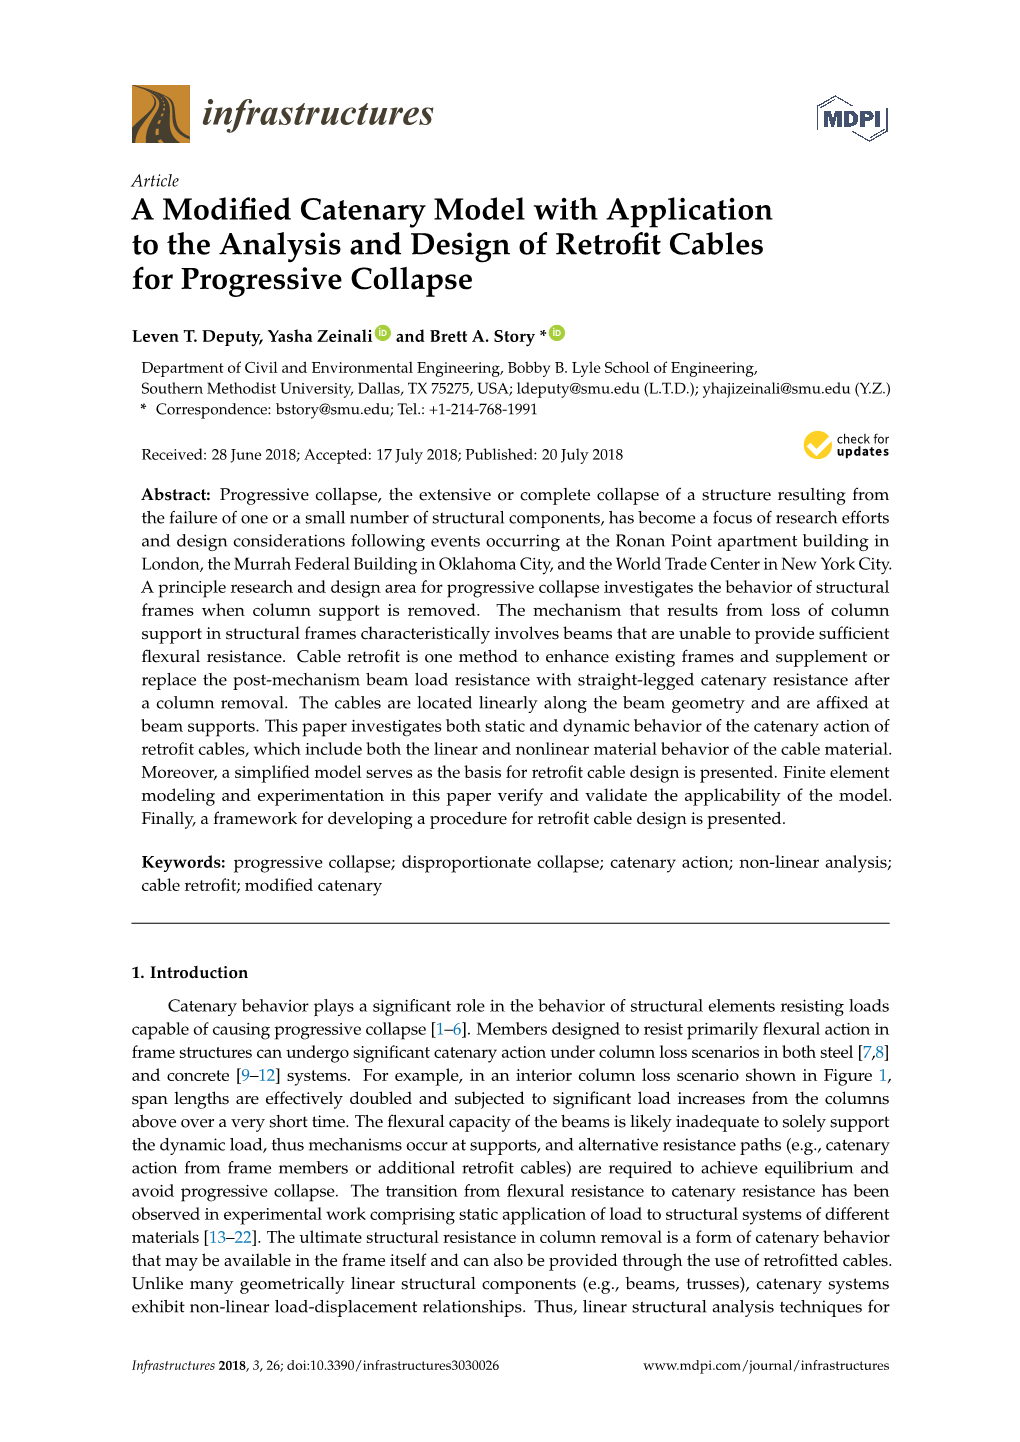 A Modified Catenary Model with Application to the Analysis and Design of Retrofit Cables for Progressive Collapse